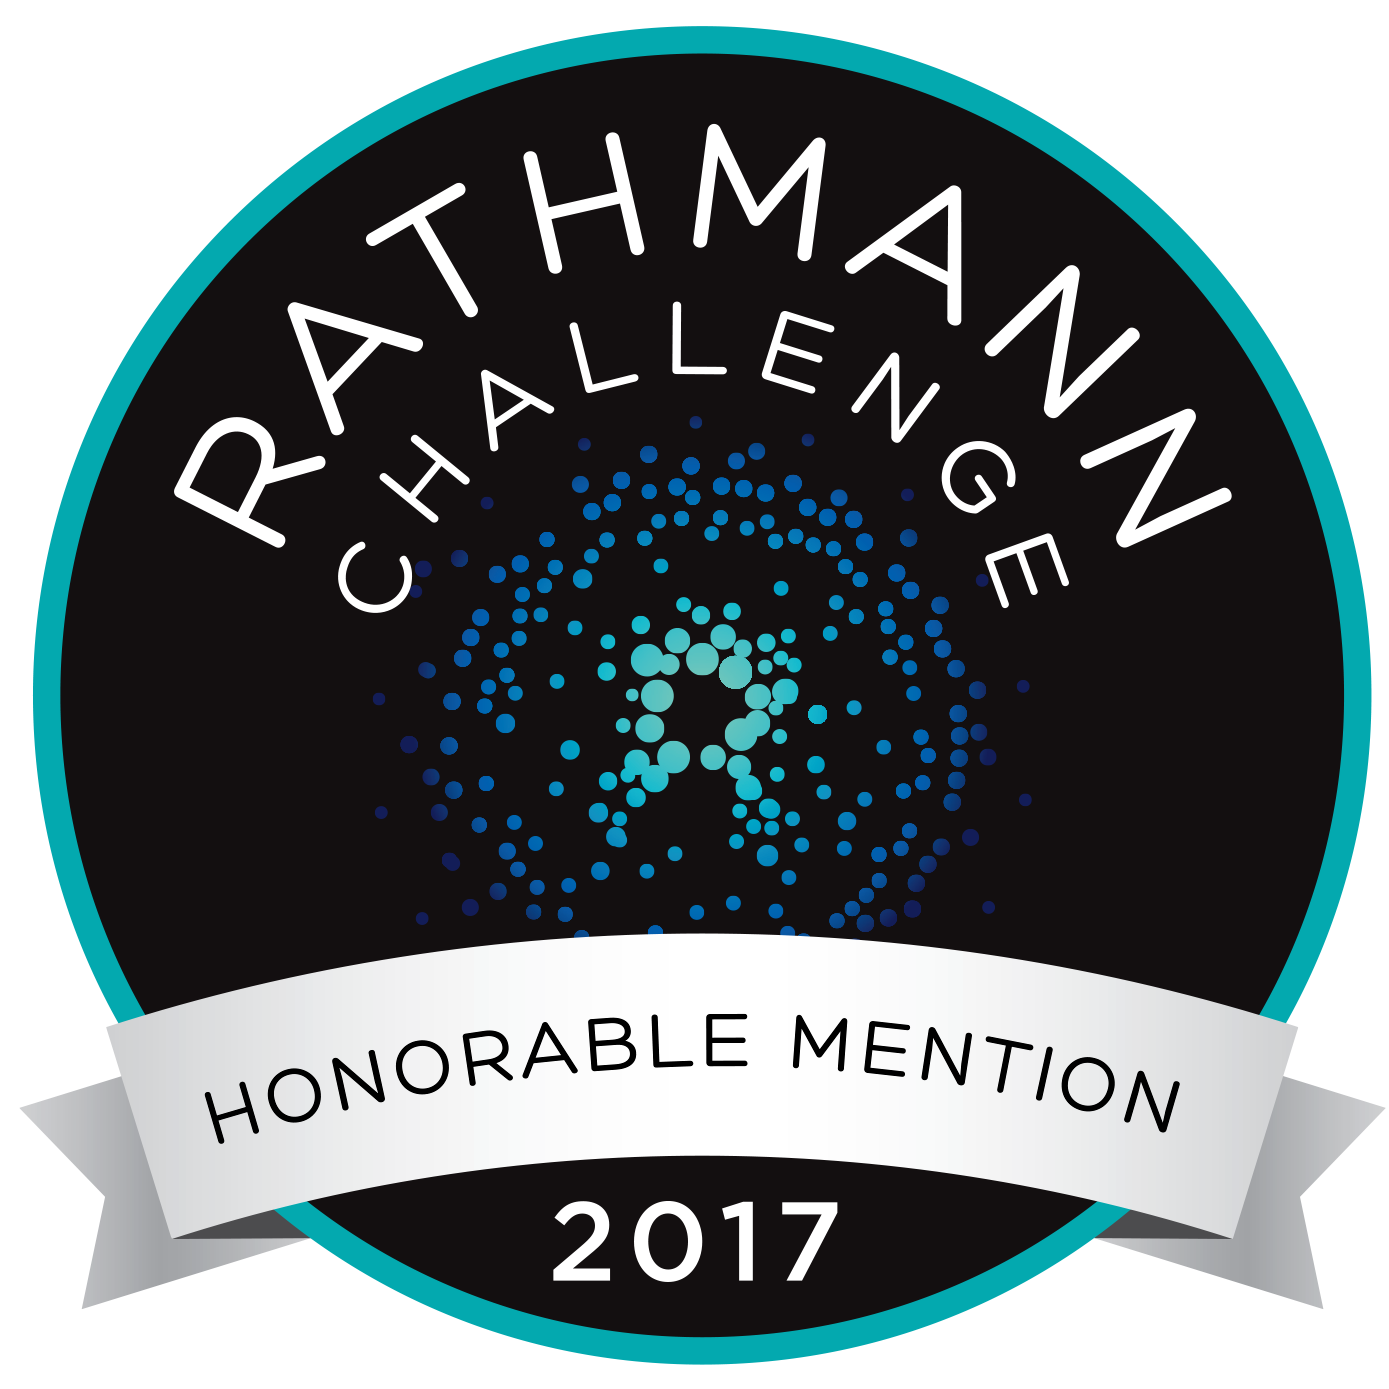 2017-rathmann-badge-honorable-mention-full-color.png